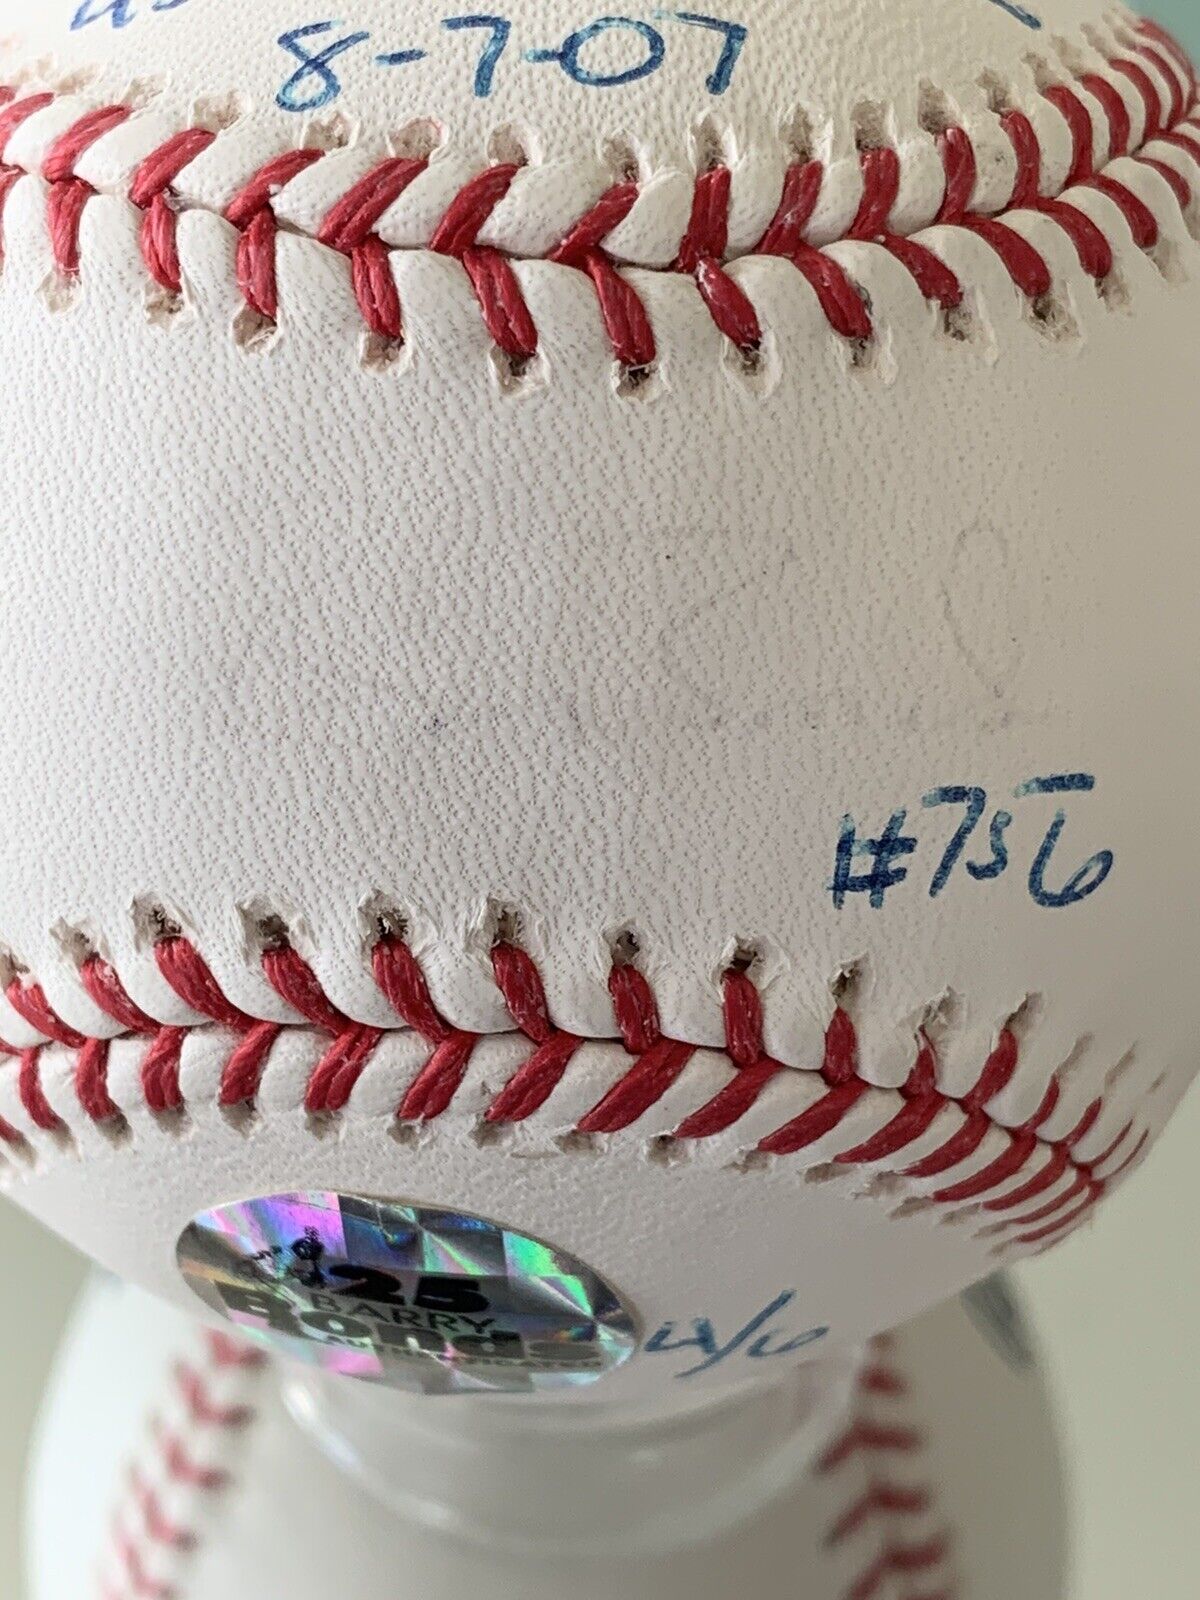 ball Barry Bonds, Mike Bacsik, 756 HR Giants Signed Auto 4/6